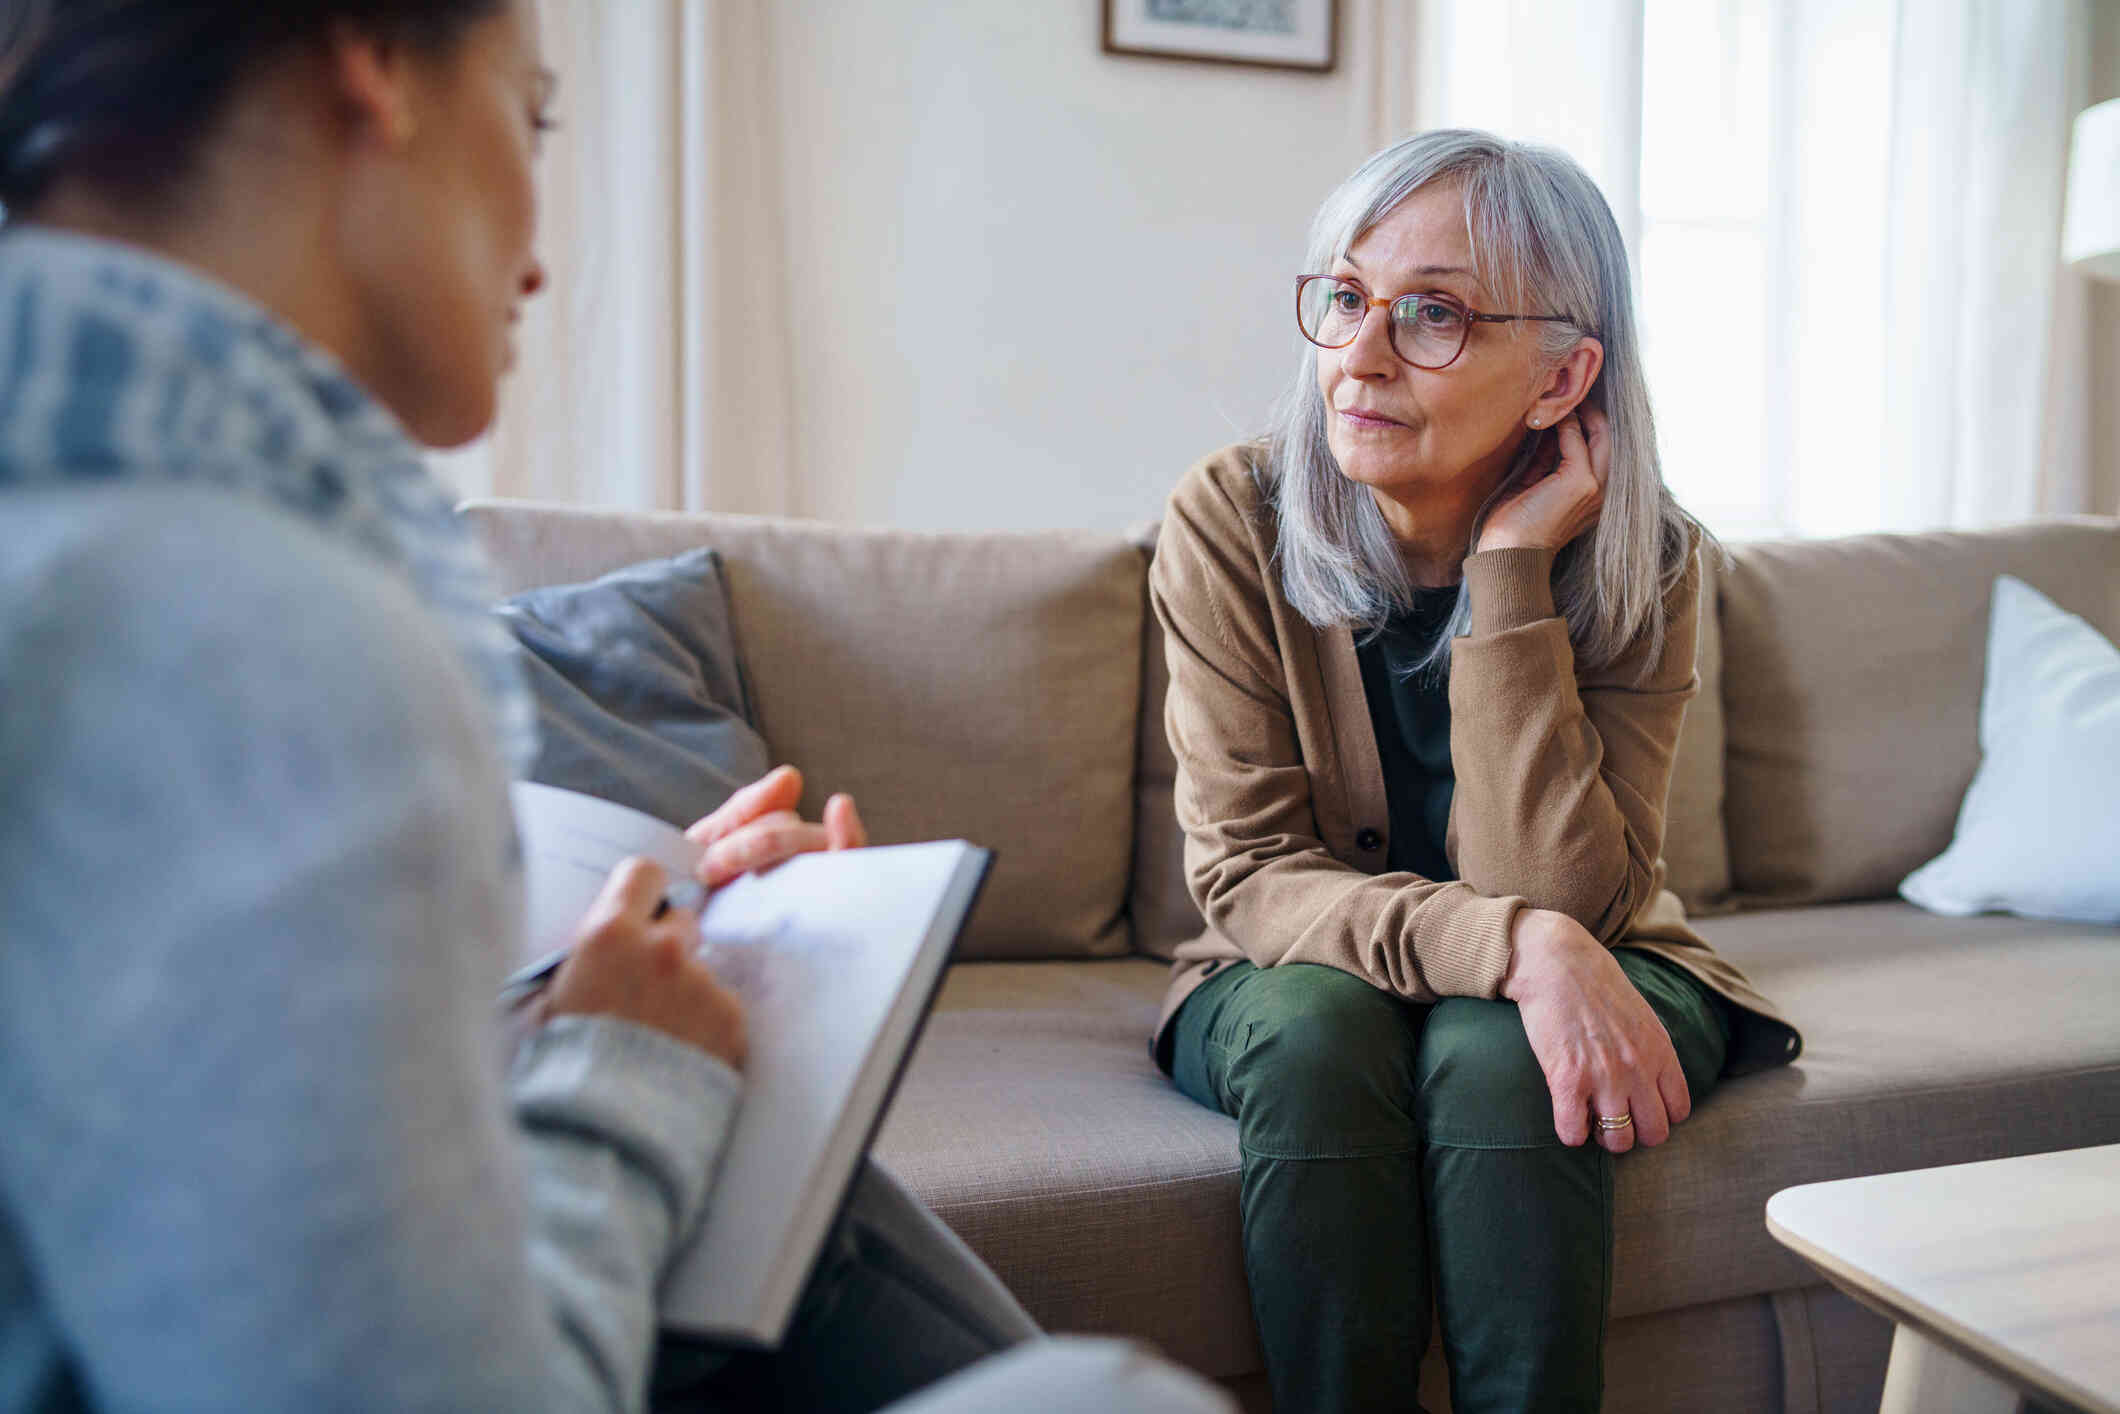 A mature woman with glasses sits hunched voer on the couch as she looks at the therapist sitting across from her with a worried expression.